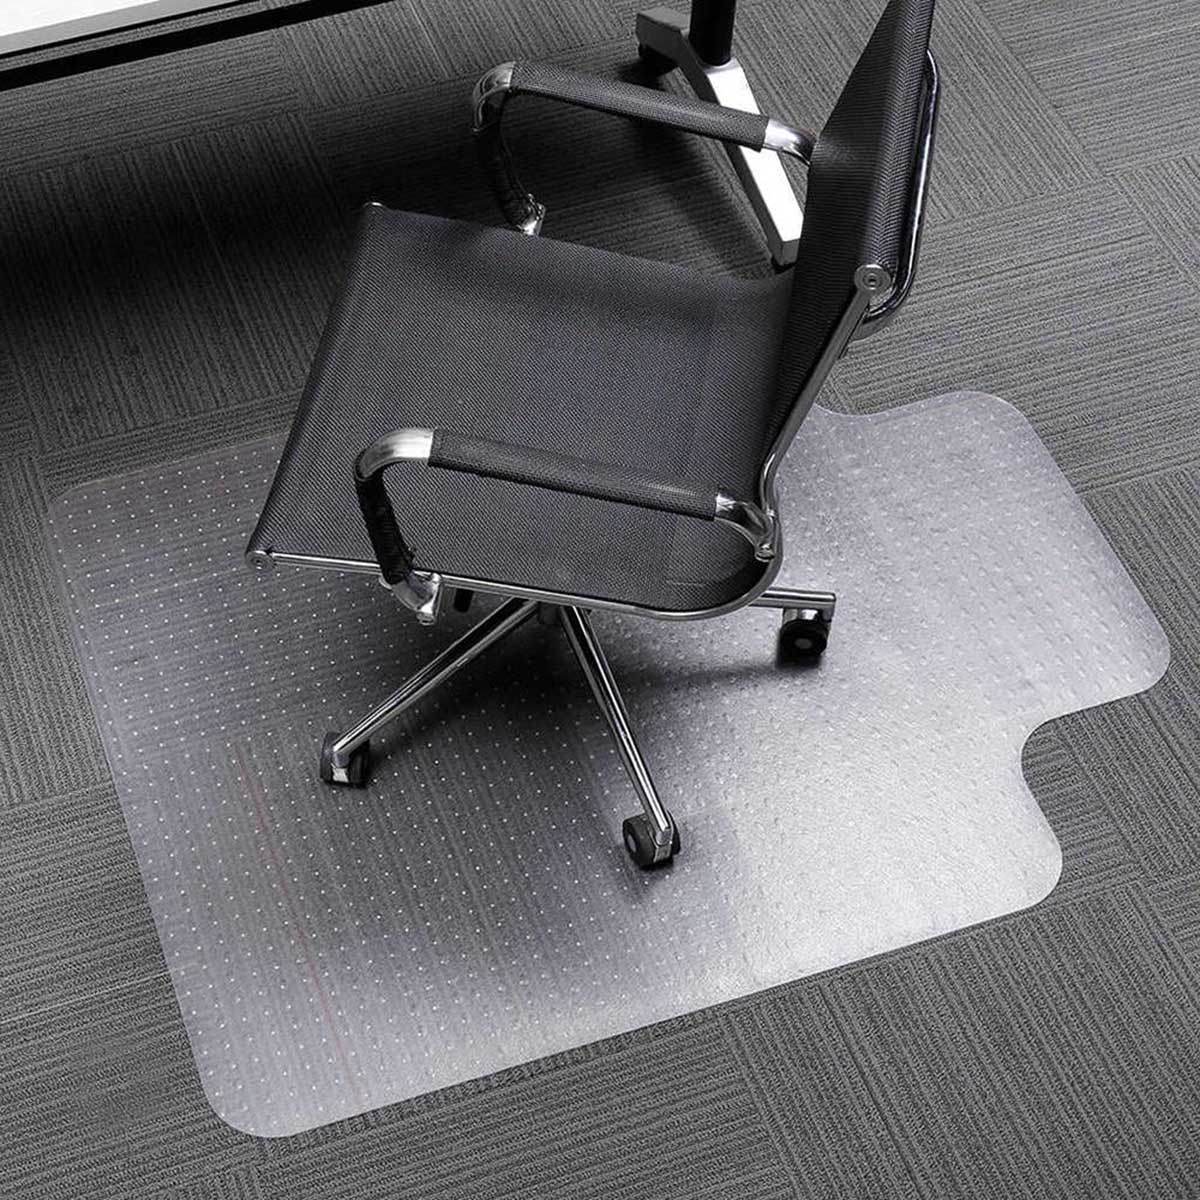 How To Prevent Chair Mat From Sliding On A Carpet